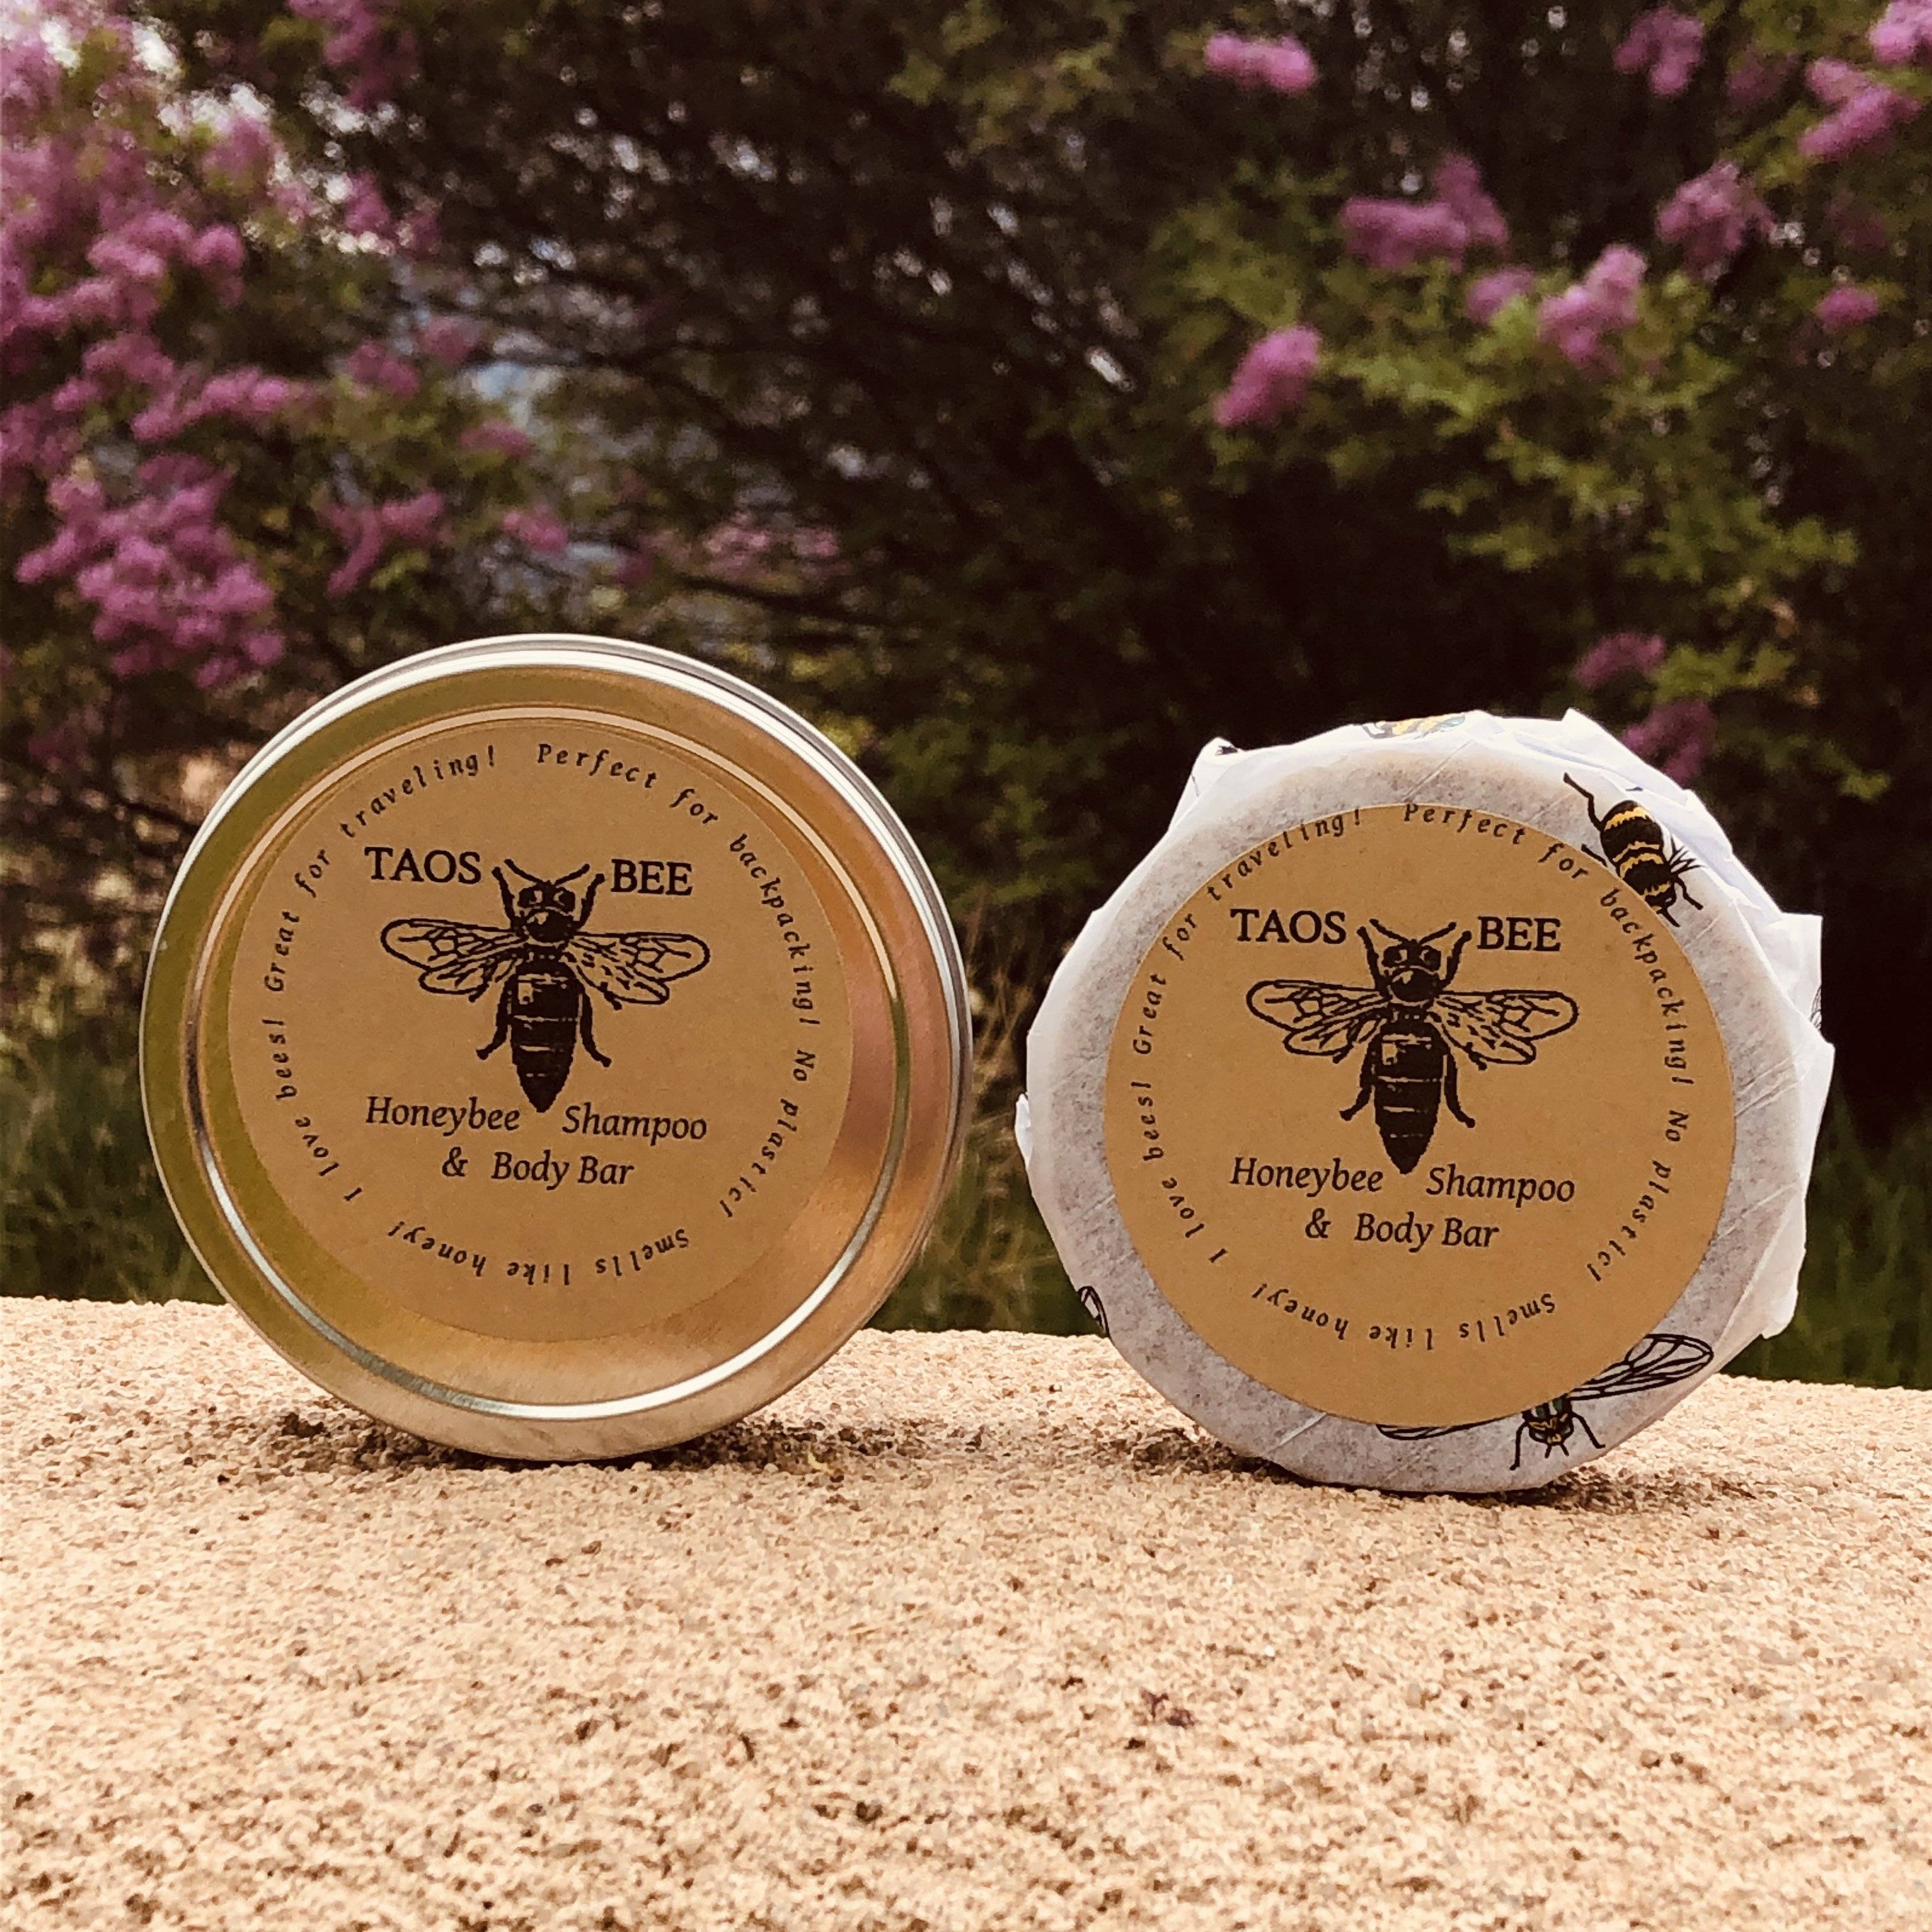 Honeybee Shampoo and Body Bar – Cleans and Conditions Naturally